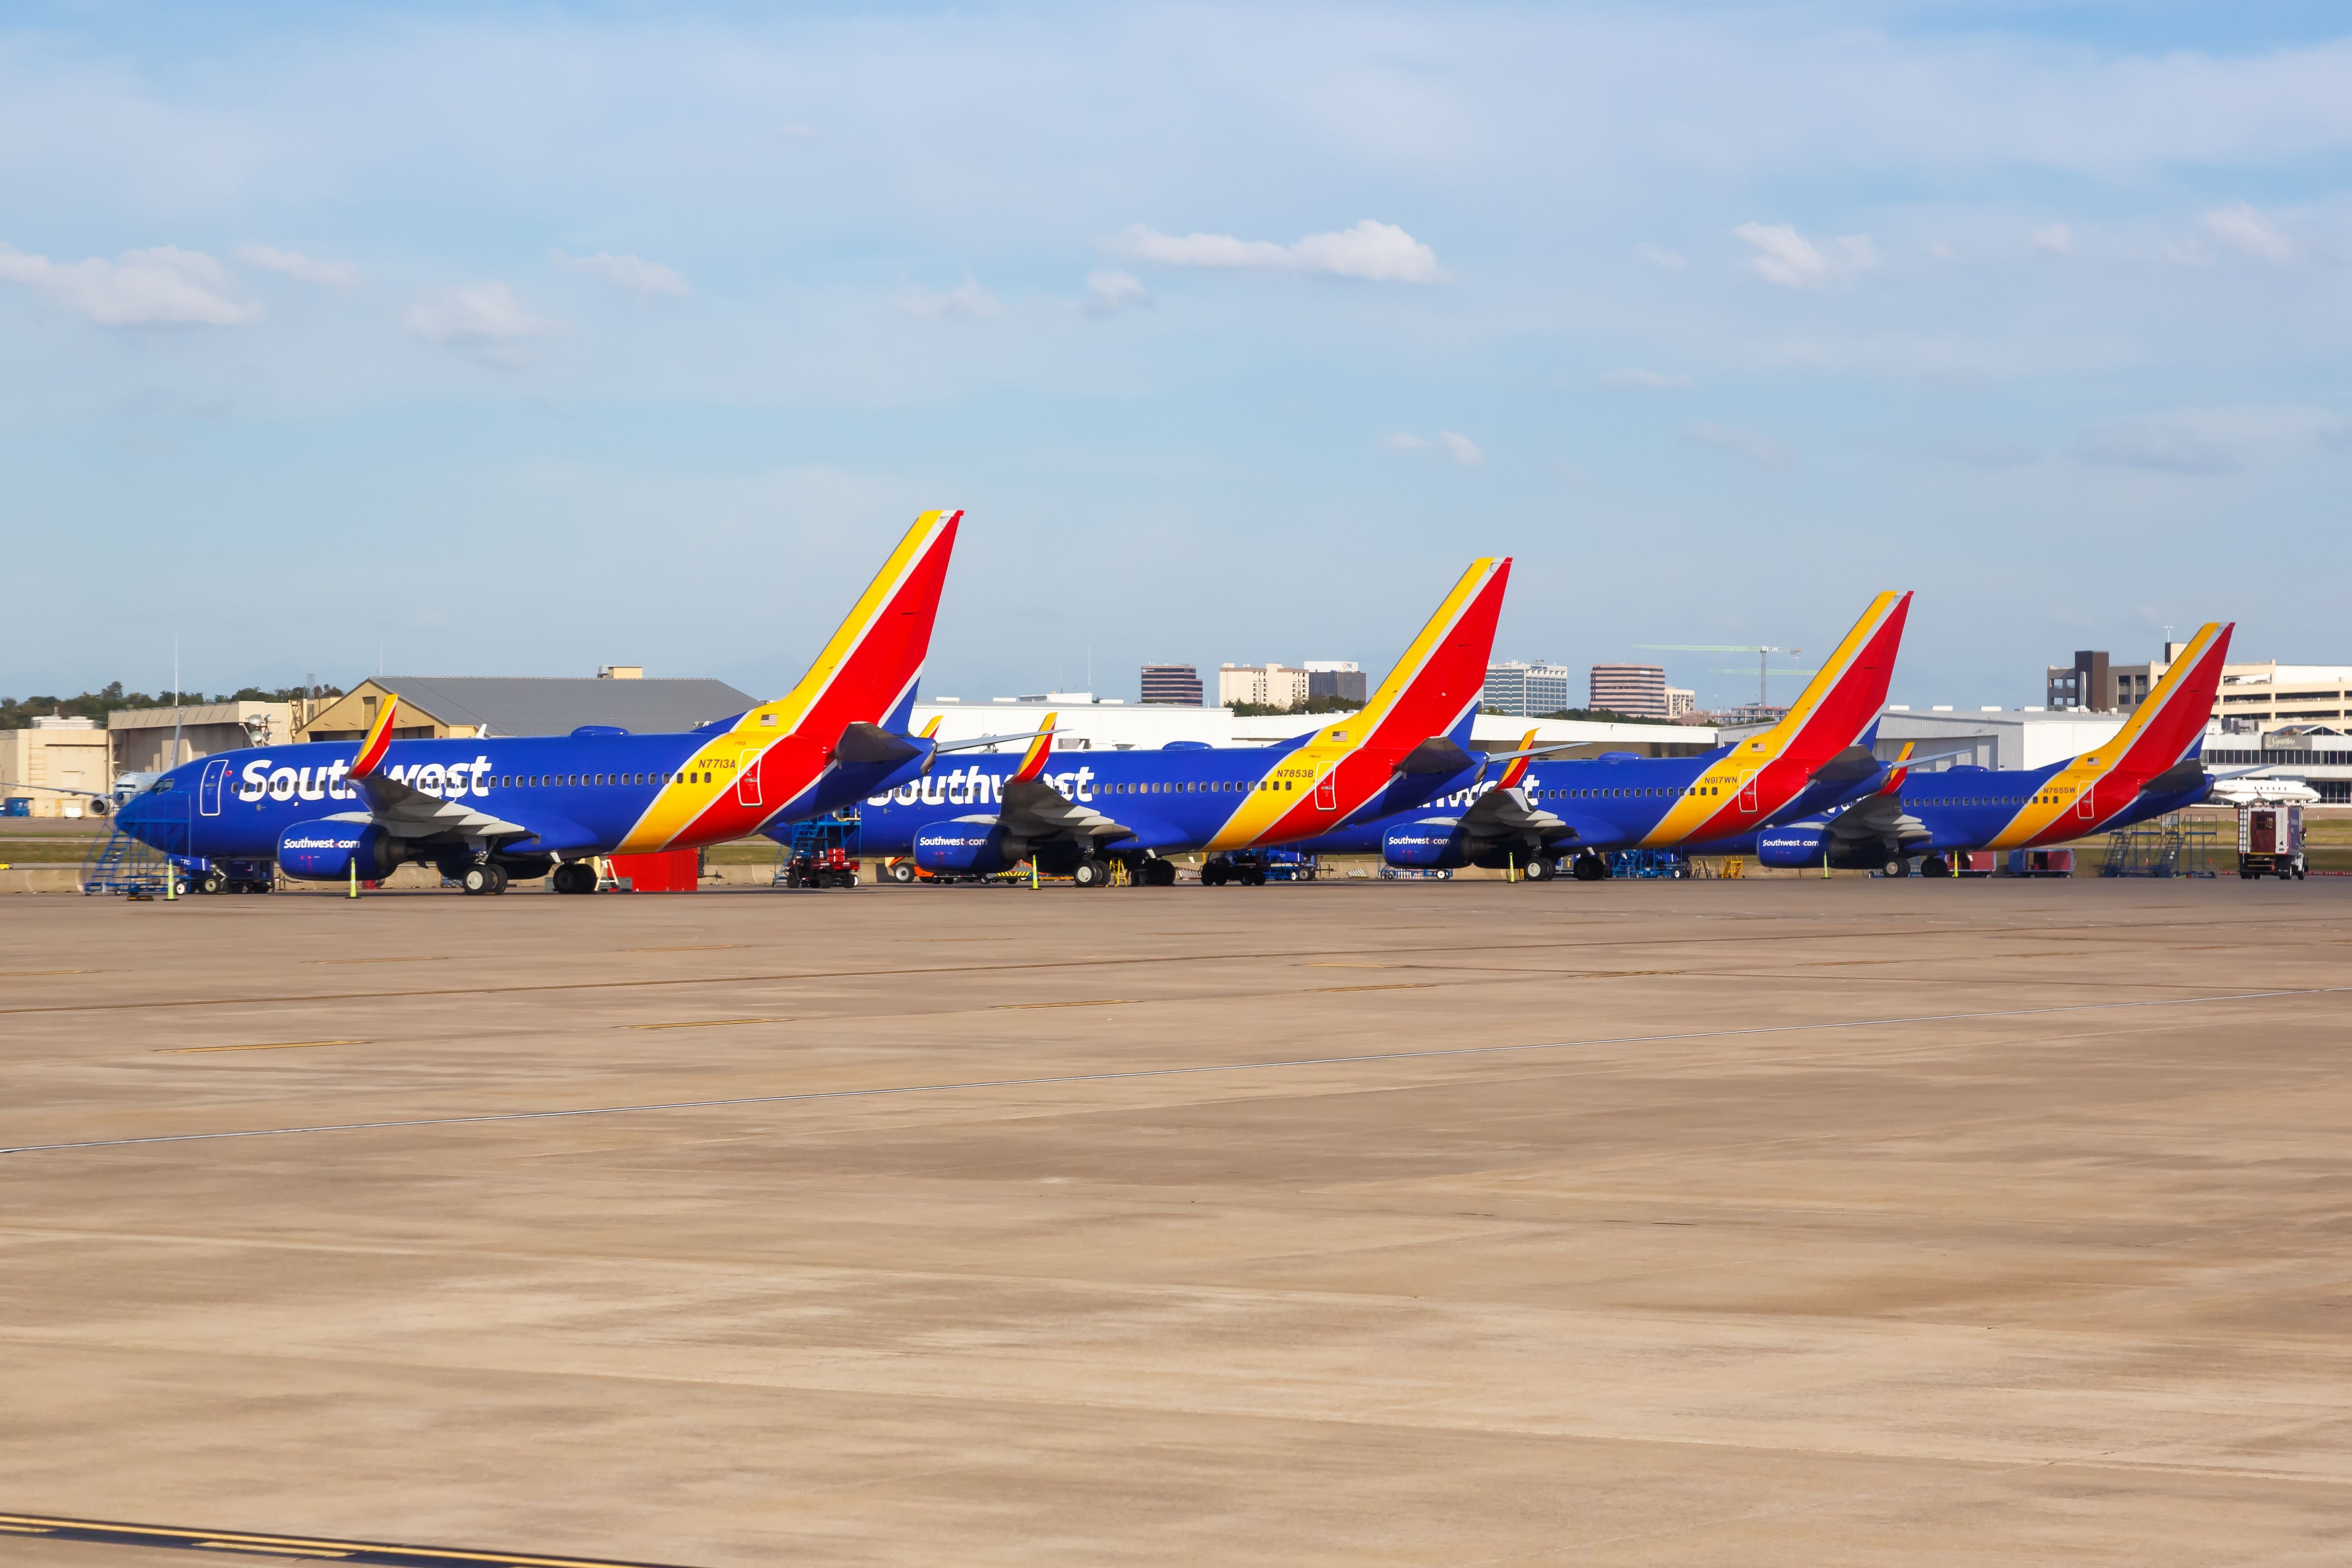 Several Southwest aircraft lined up in Dallas Love Field.